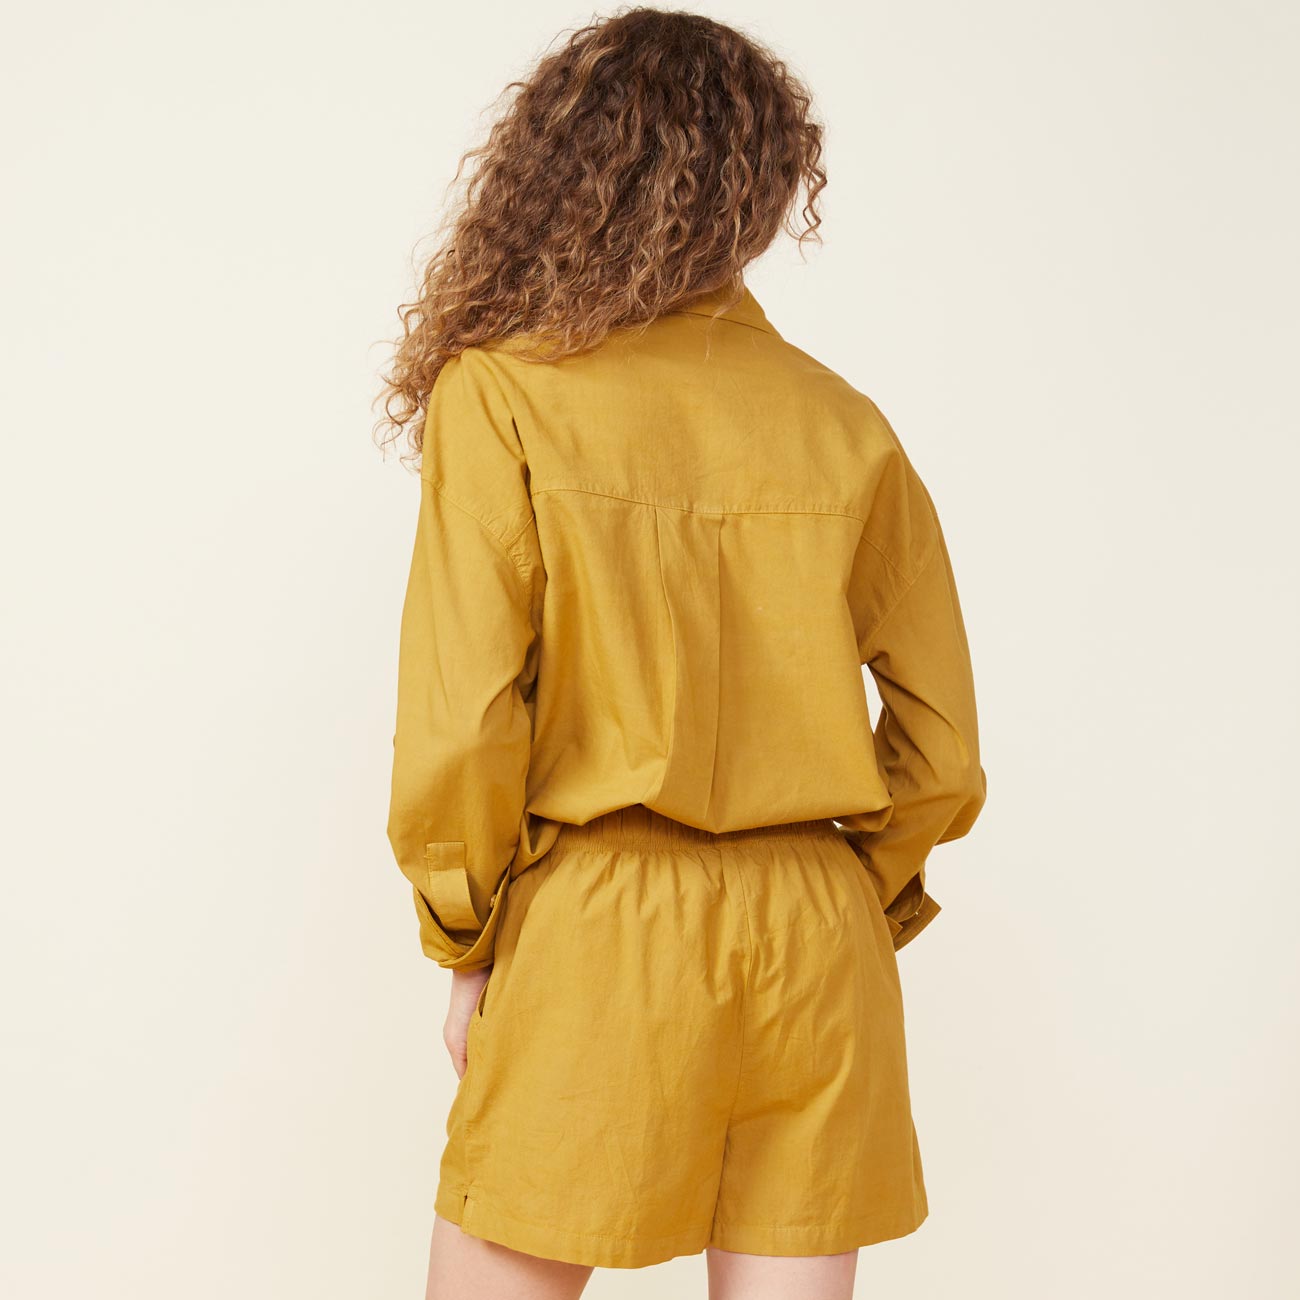 Back view of model wearing the poplin shirt in golden olive.